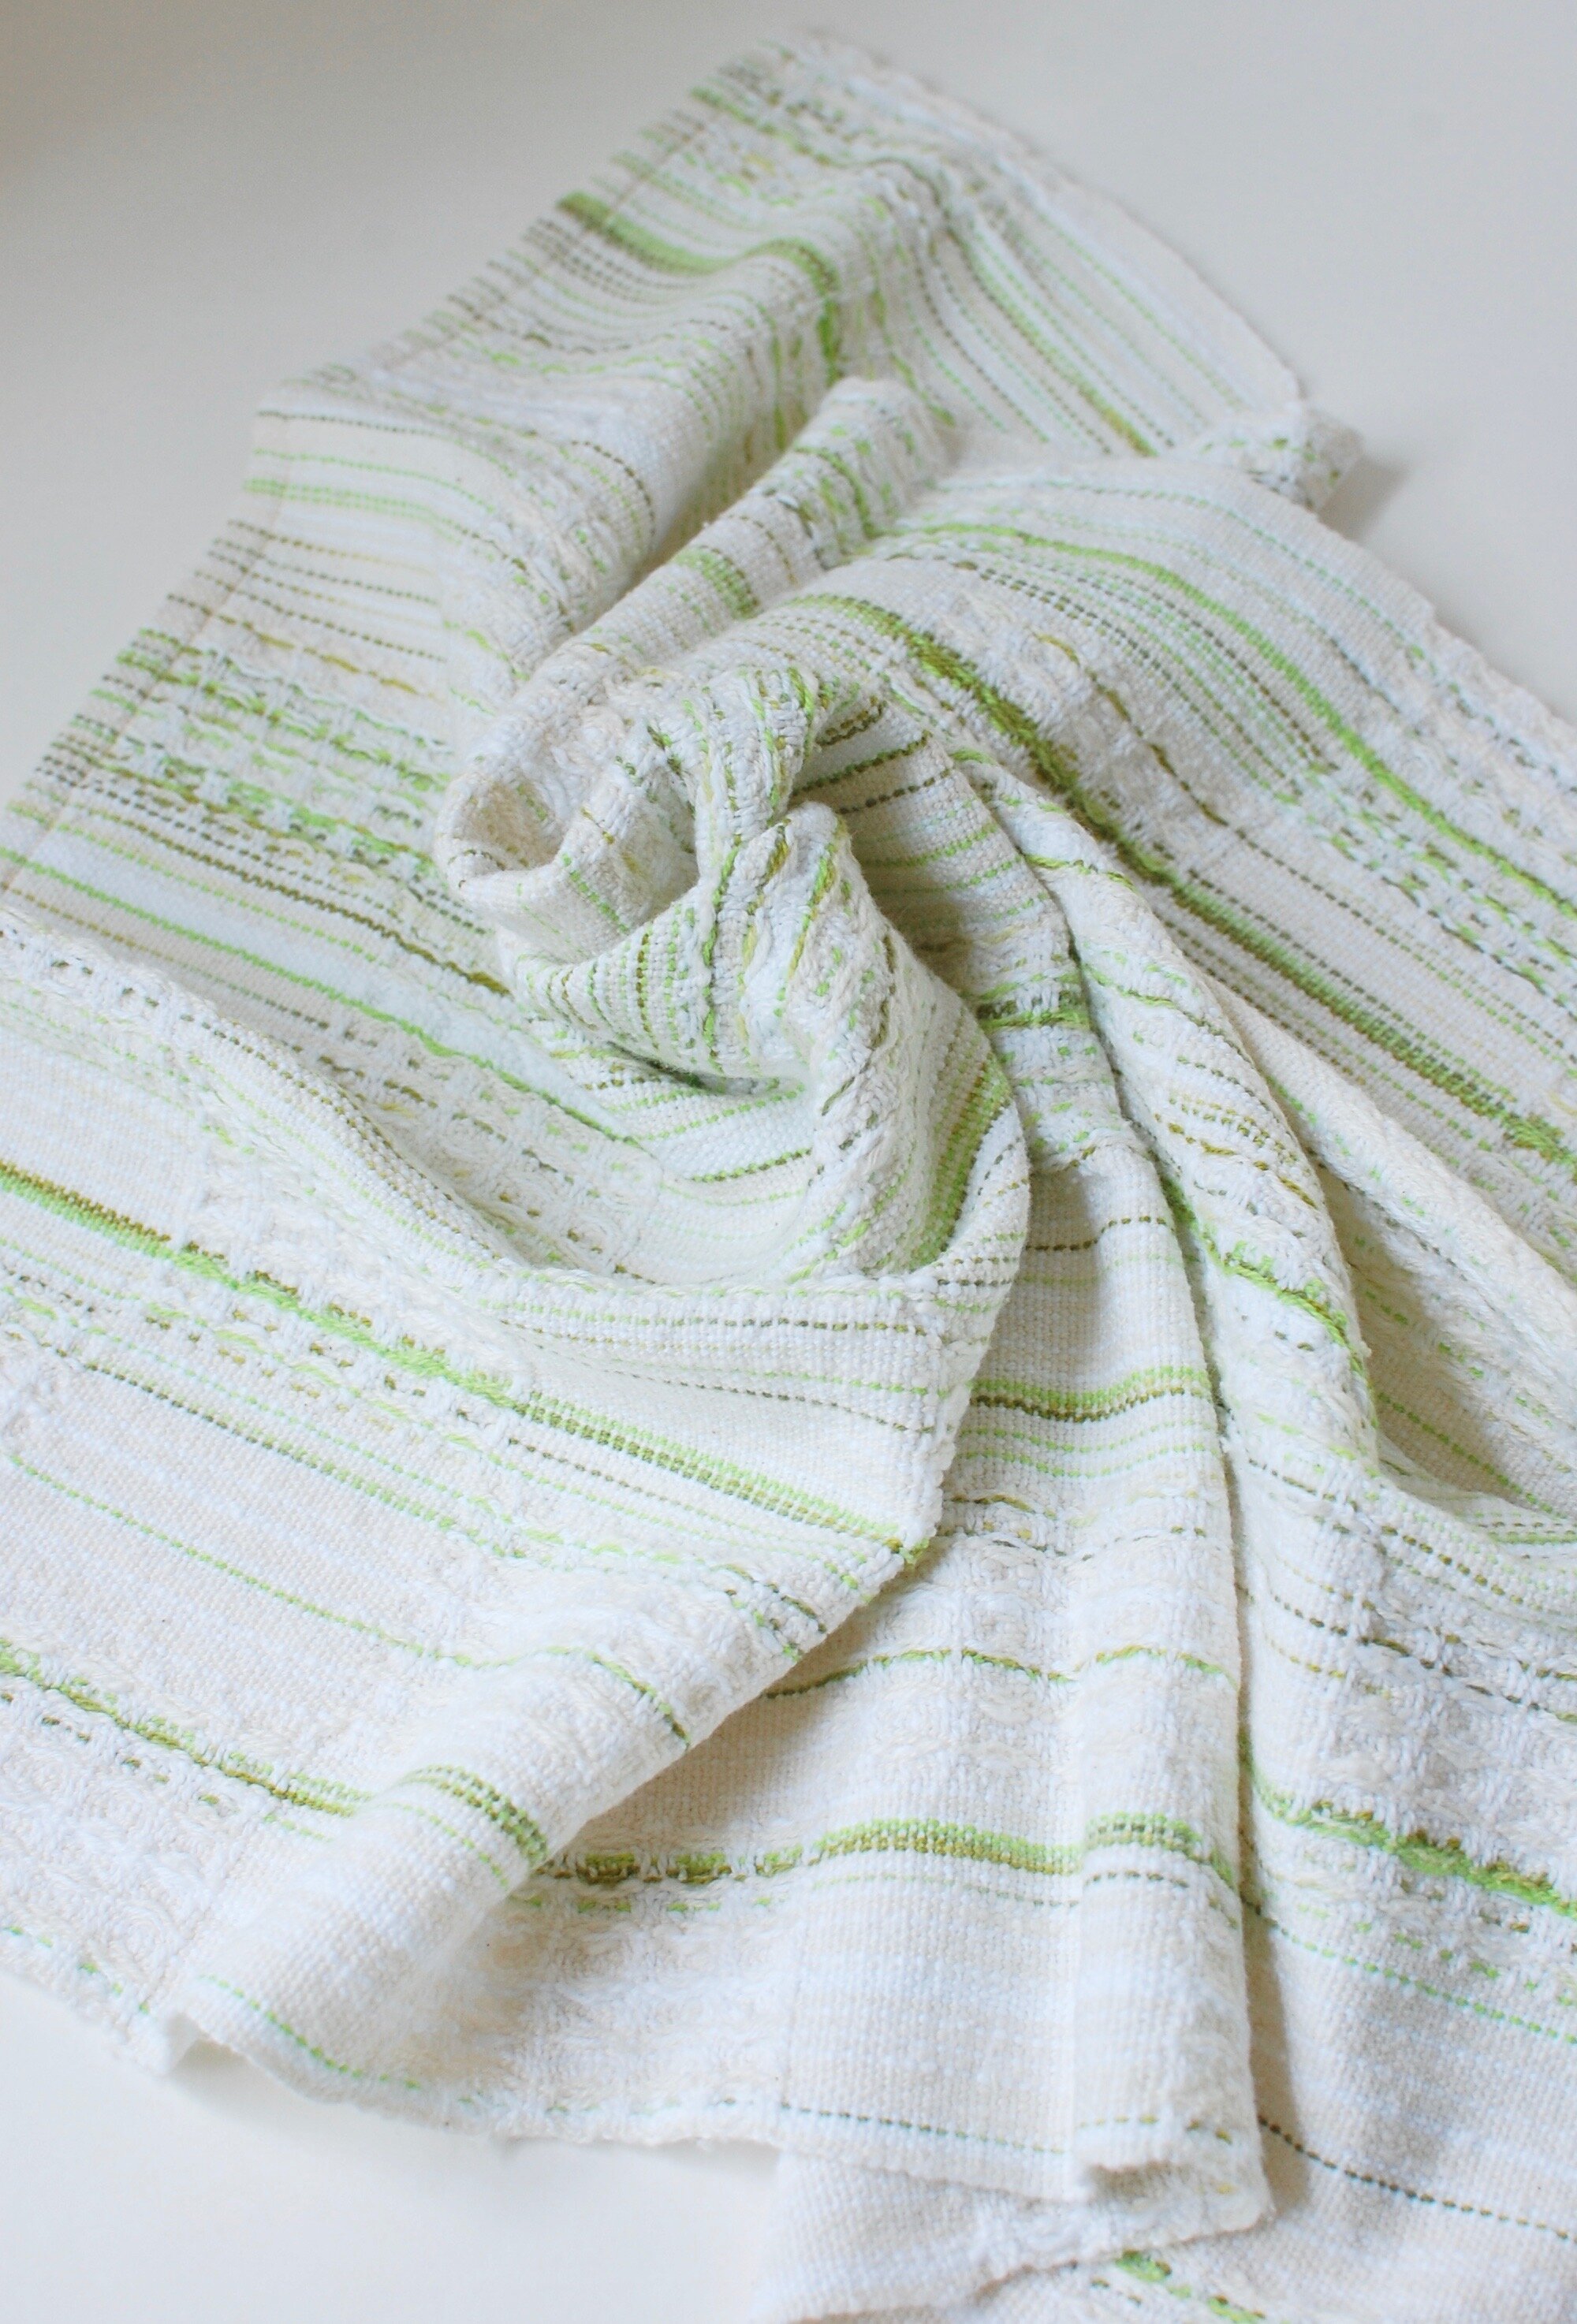 Handwoven and hand-dyed cotton towel